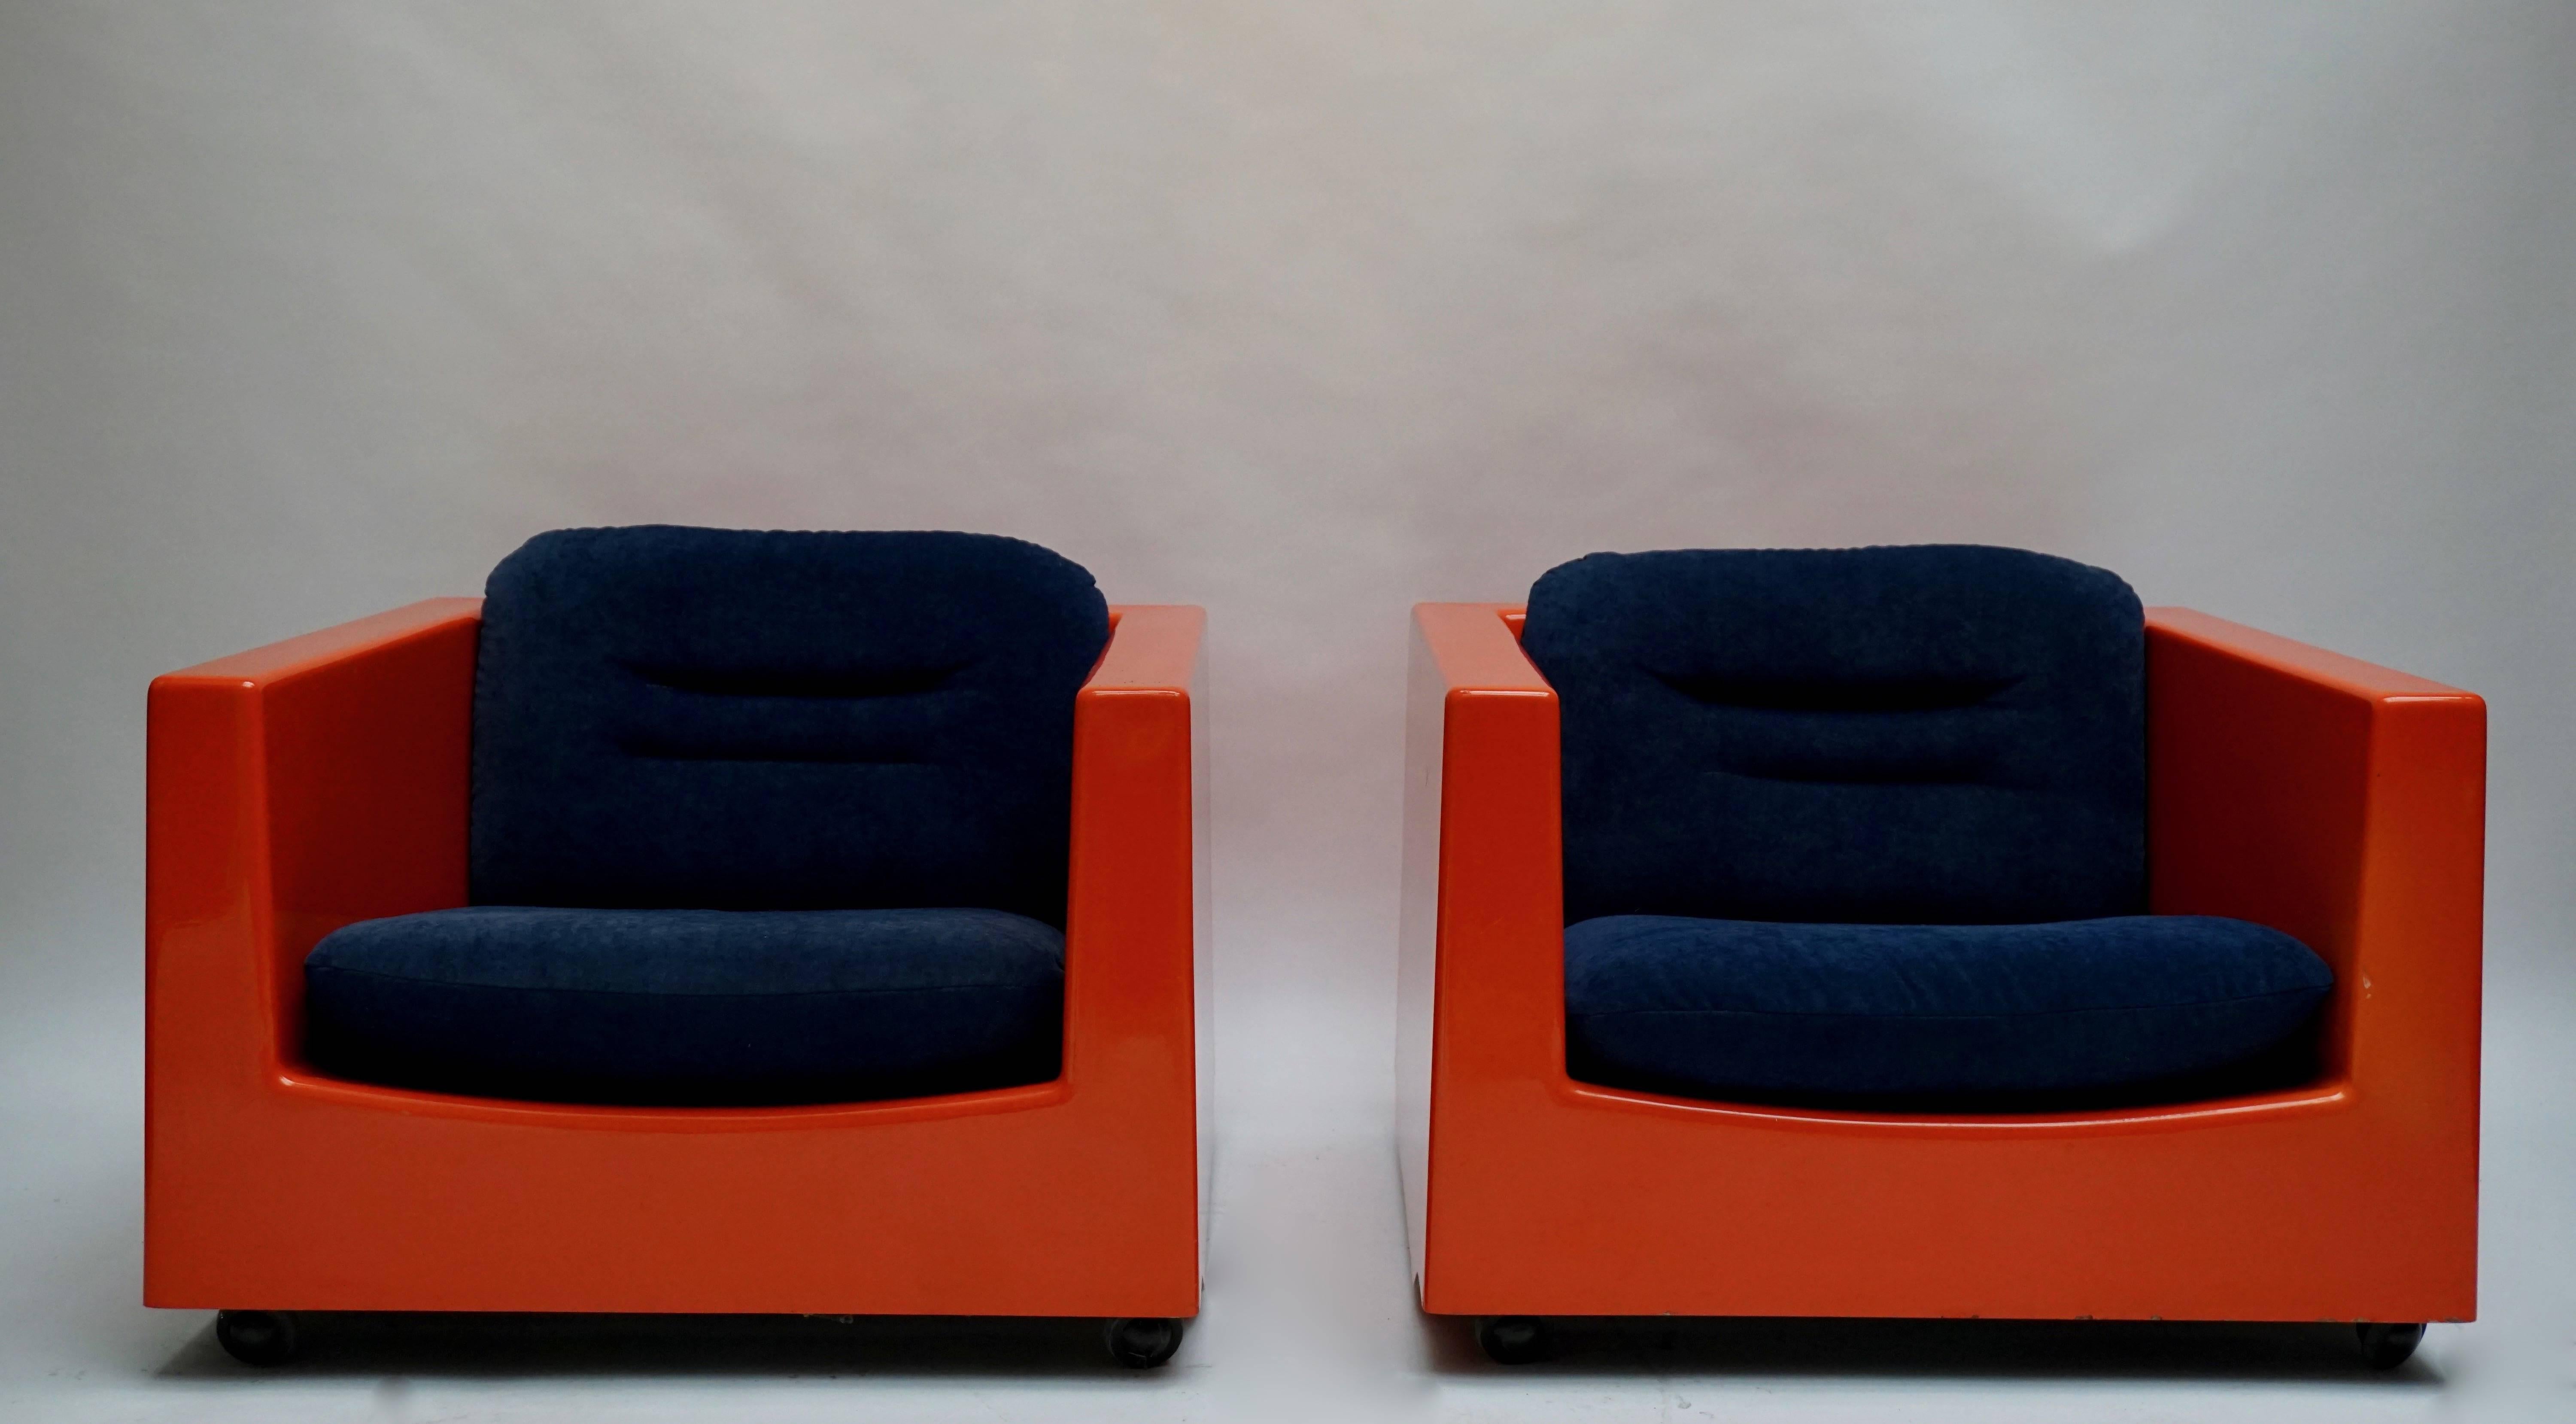 Two lounge armchairs on casters by French Designer Roger Tallon. The shells are made from fibreglass.
This vintage set is in good condition and incredibly comfortable to sit in.